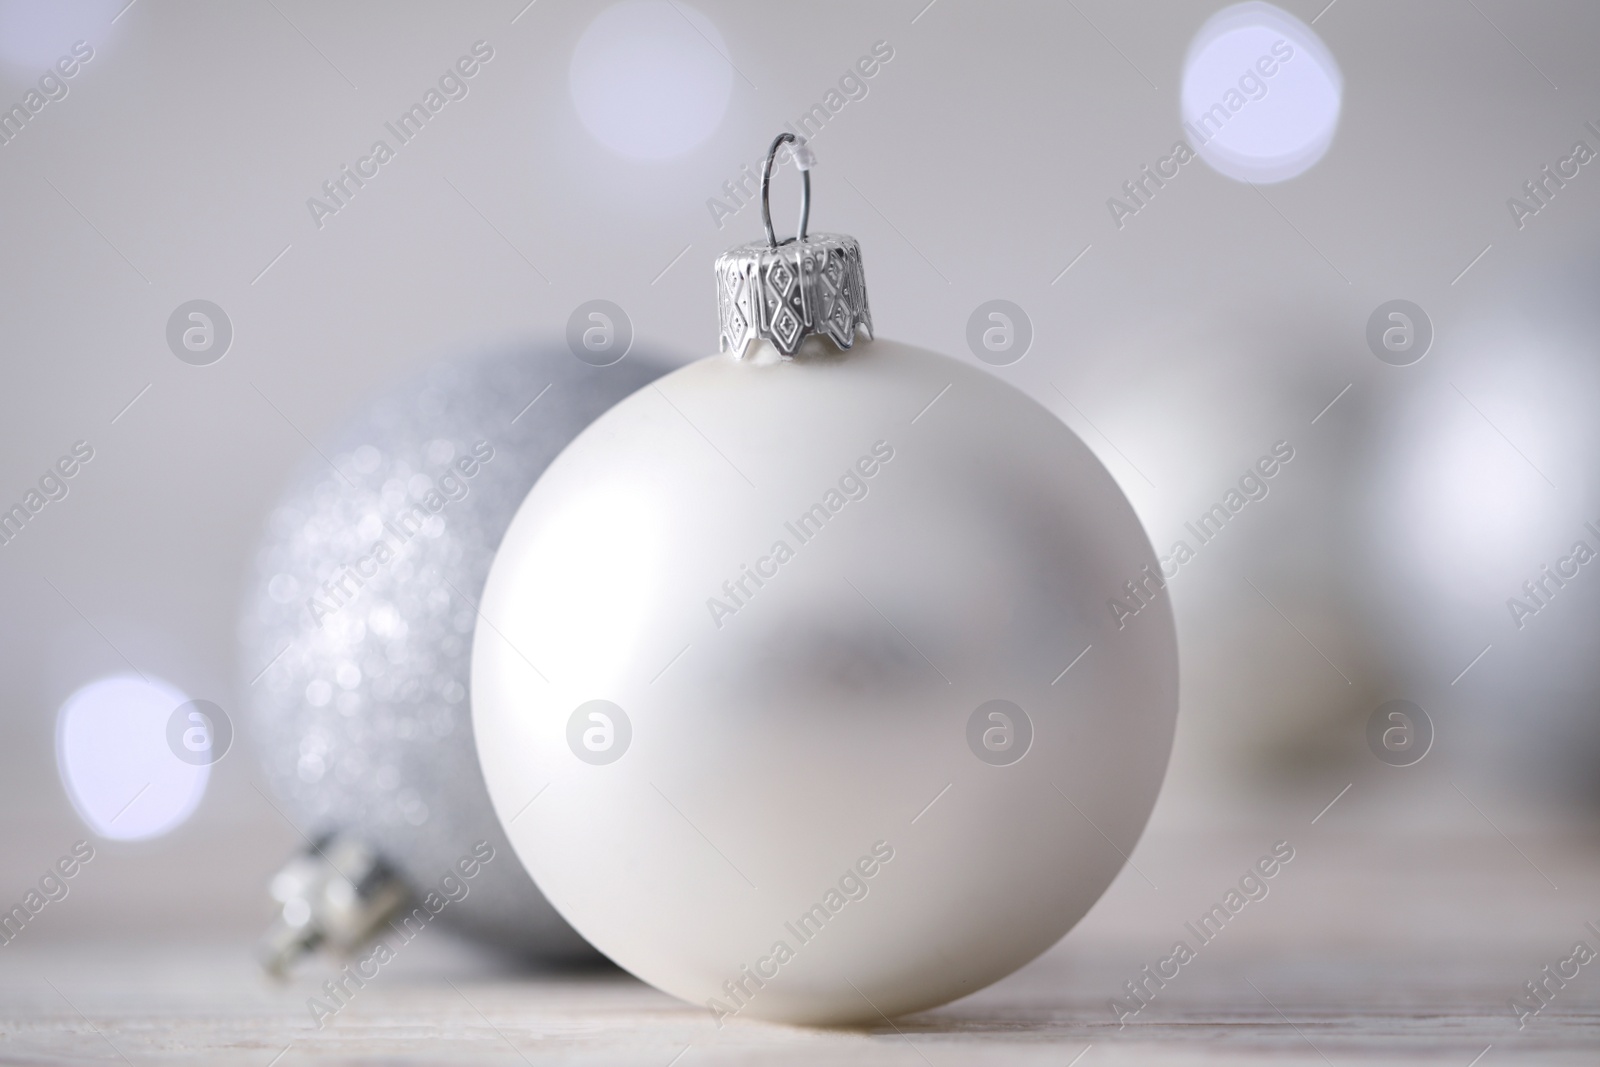 Photo of Beautiful Christmas balls on table against blurred festive lights